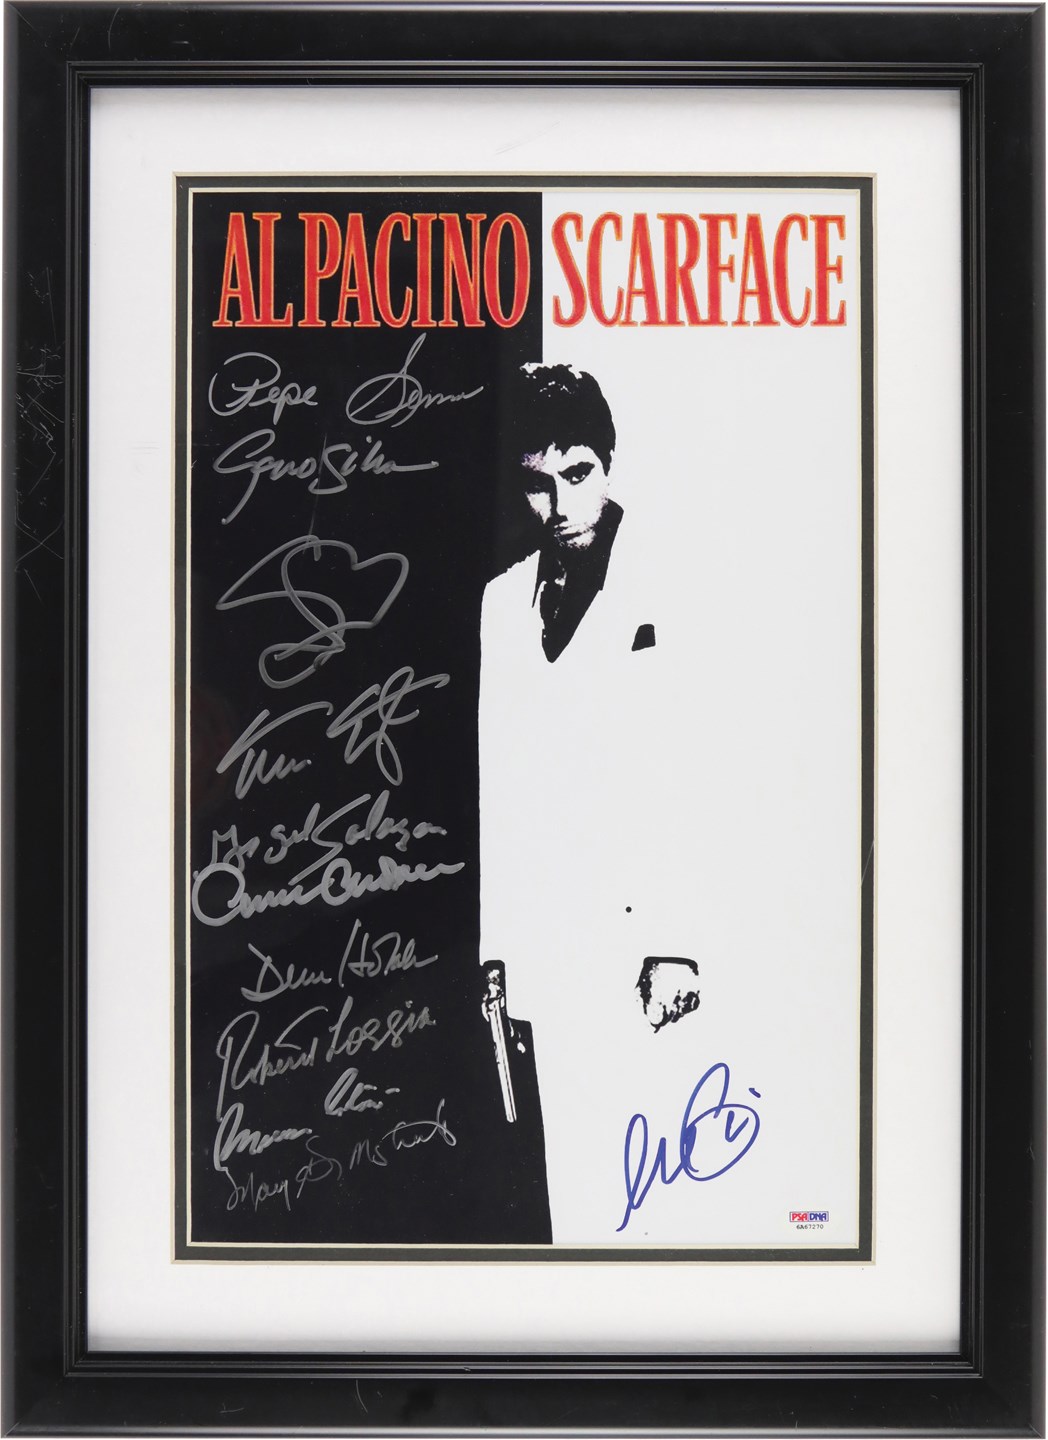 - Scarface Cast Signed Poster w/Al Pacino (PSA)